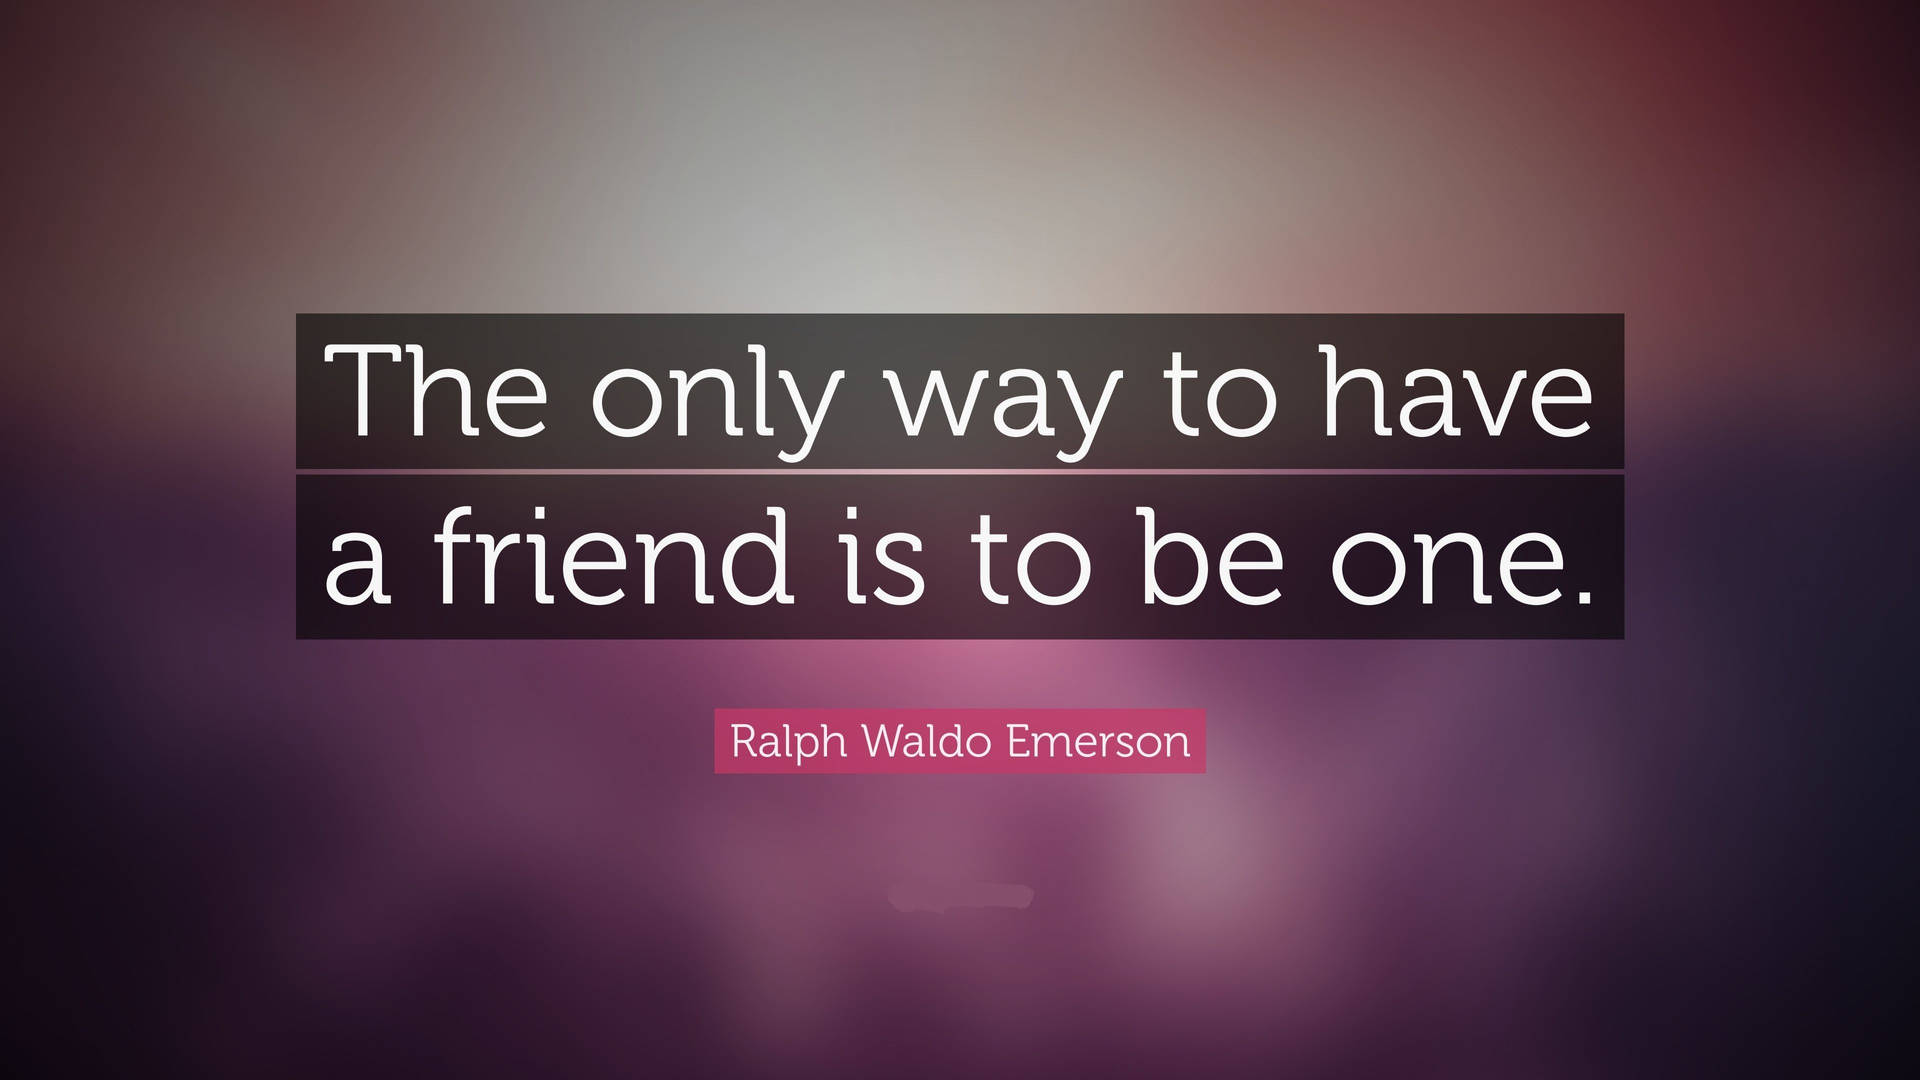 Friendship Quotes By Ralph Waldo Emerson Background